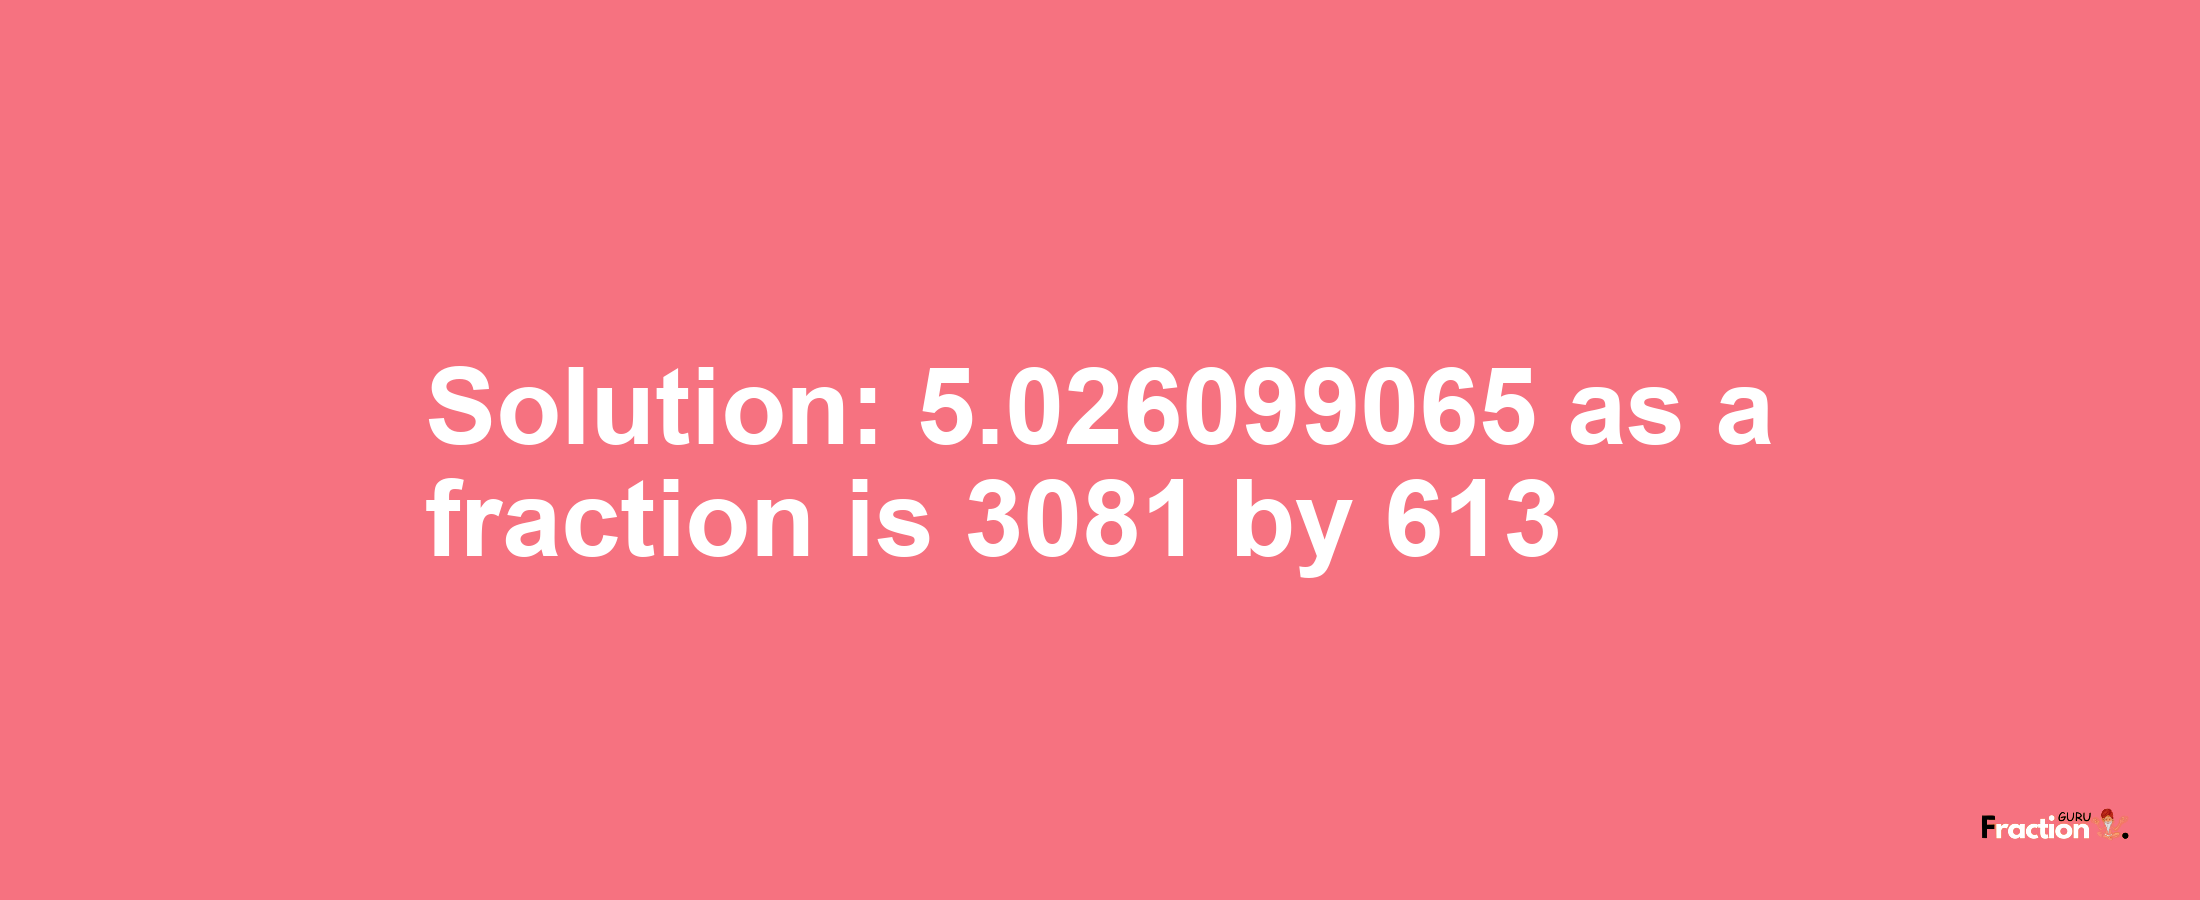 Solution:5.026099065 as a fraction is 3081/613